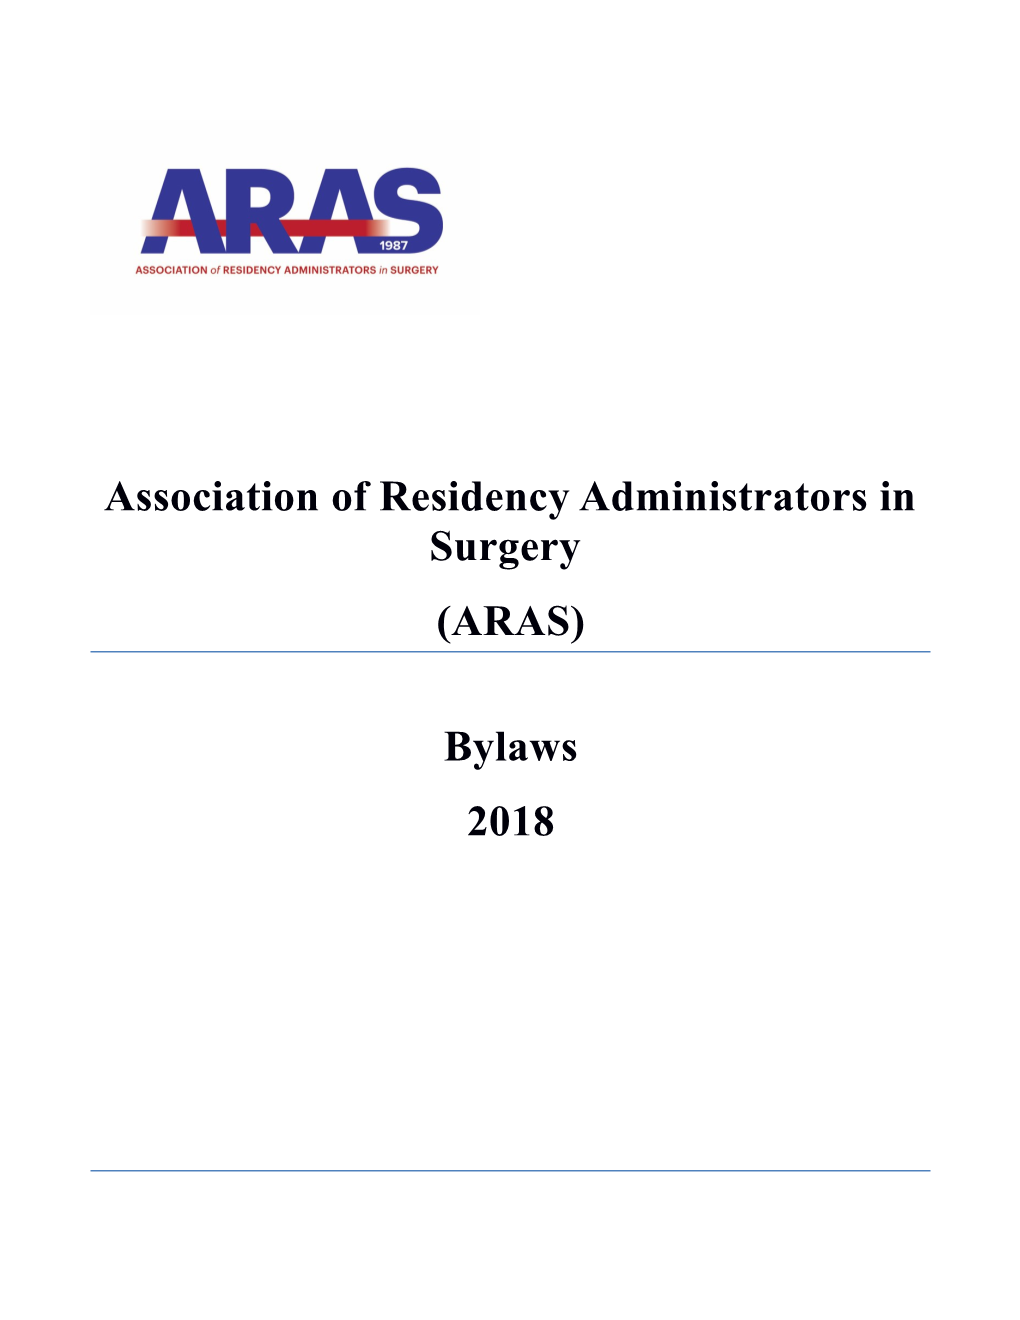 Association of Residency Administrators in Surgery